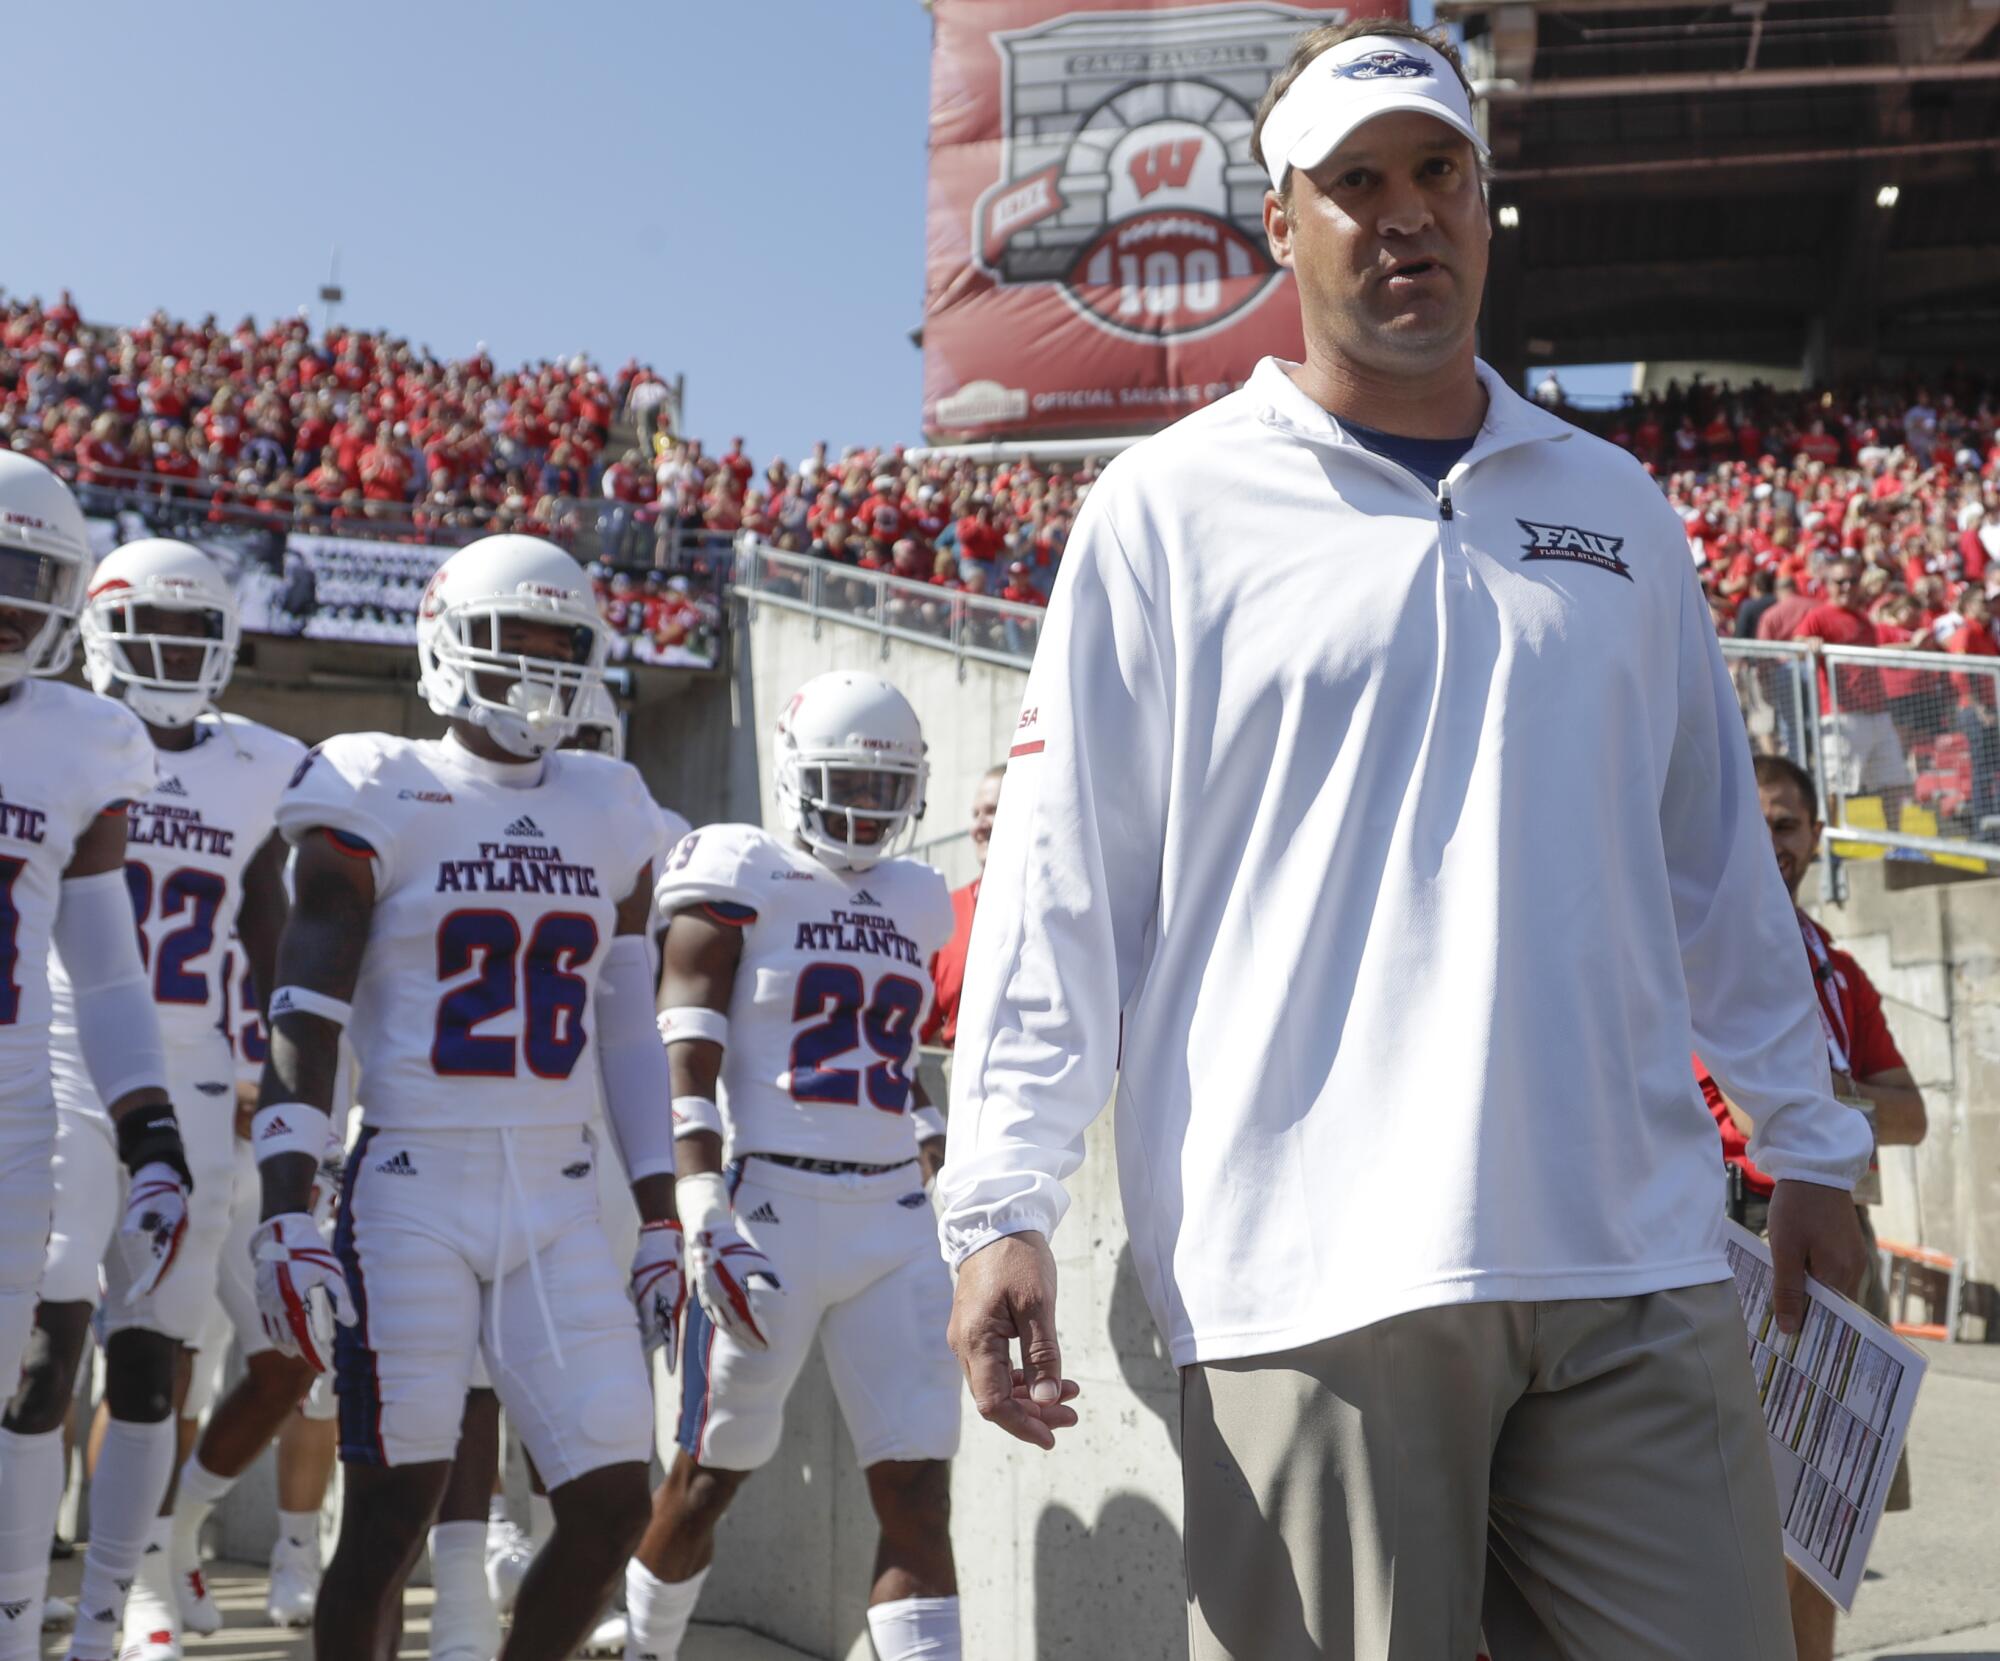 Florida Atlantic coach Lane Kiffin leads his team on the field before a game against Wisconsin.